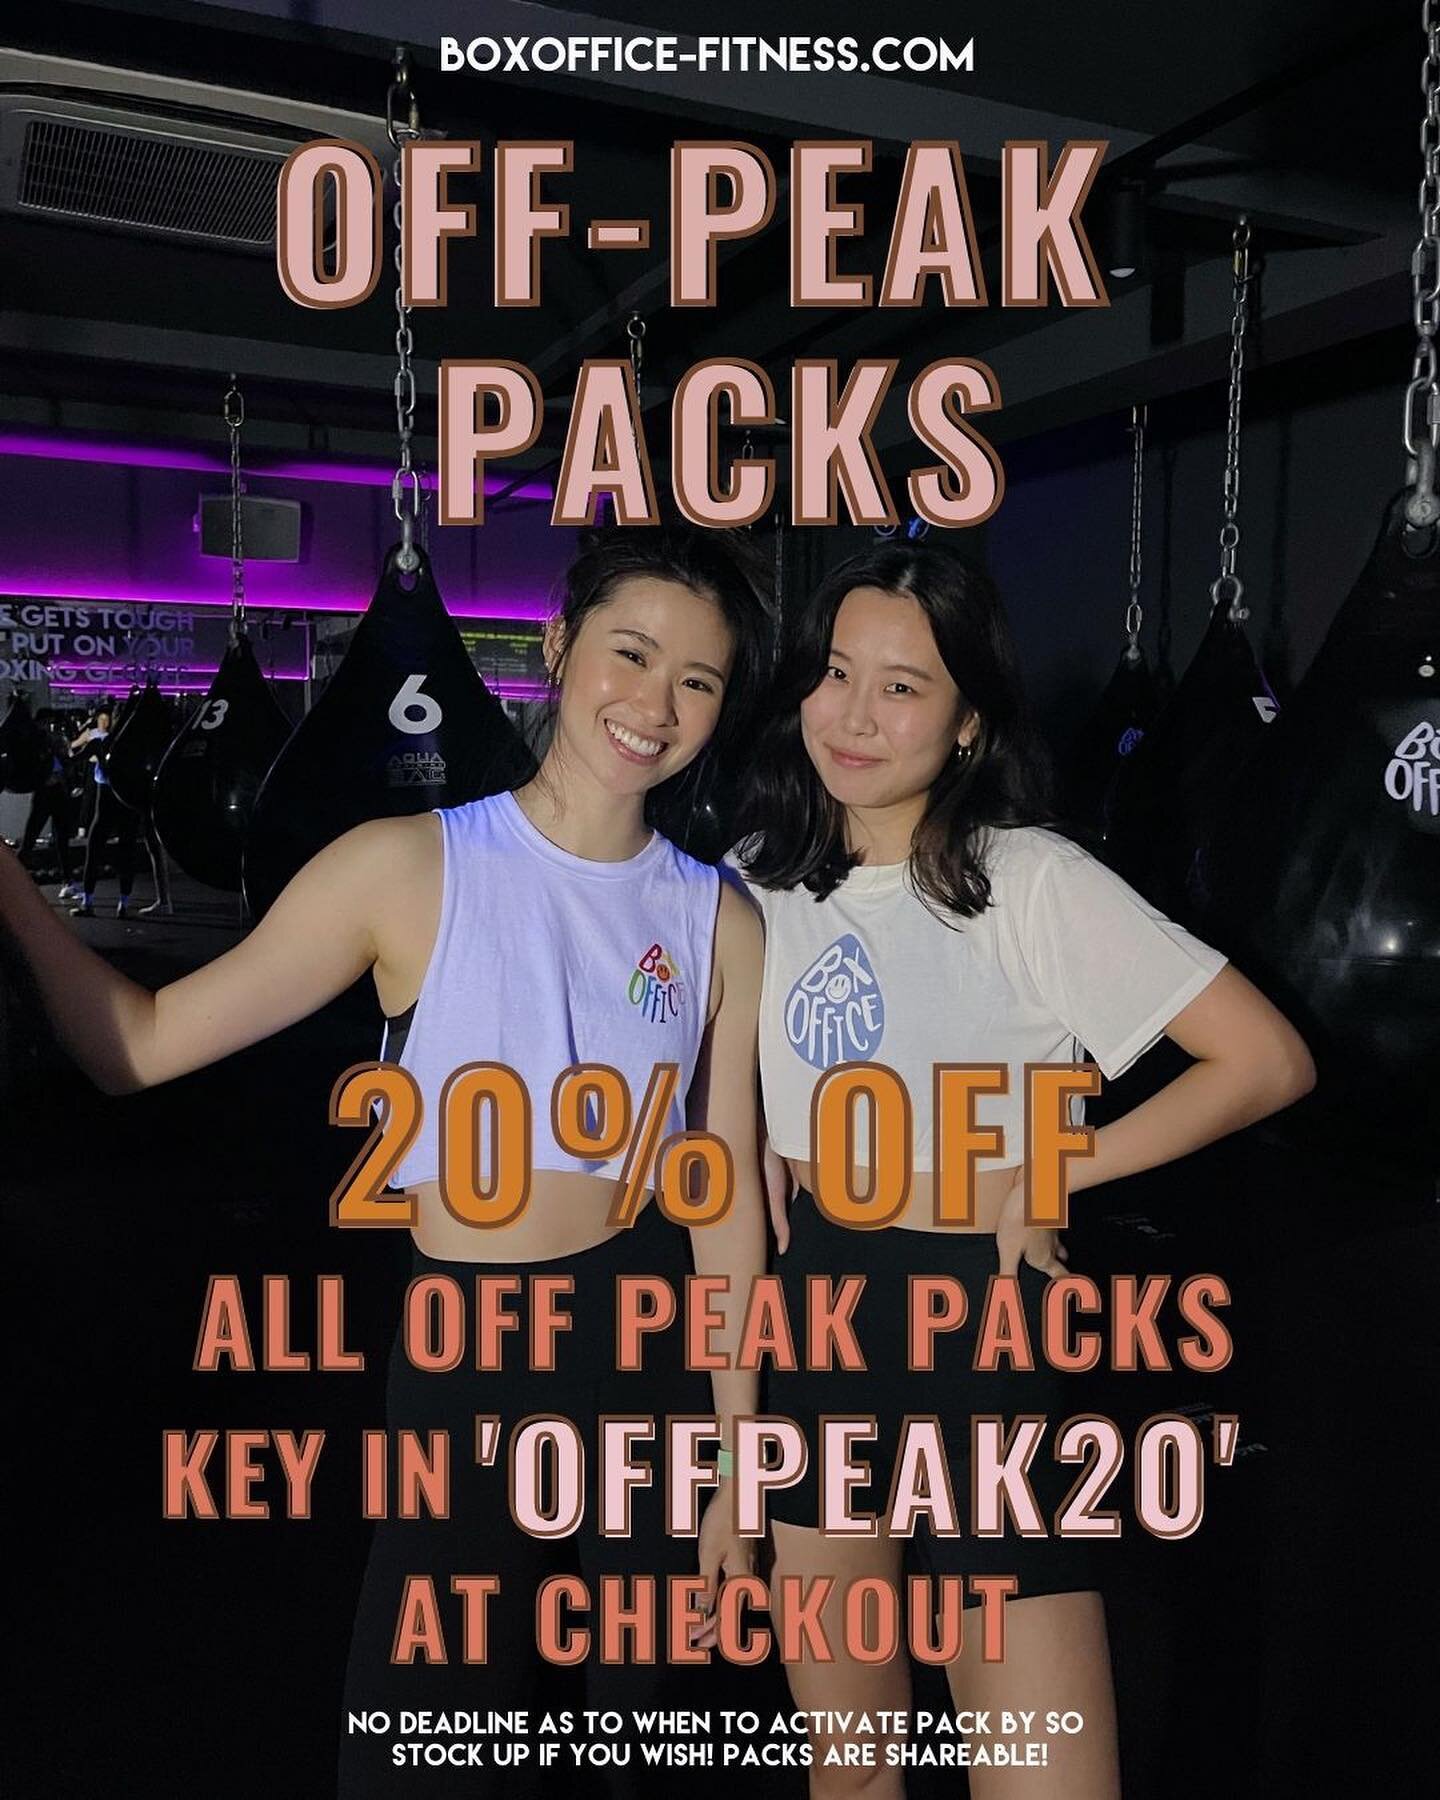 OUTSTANDING OFF-PEAK OFFERS! 😬🌟‼️#boxofficefitness